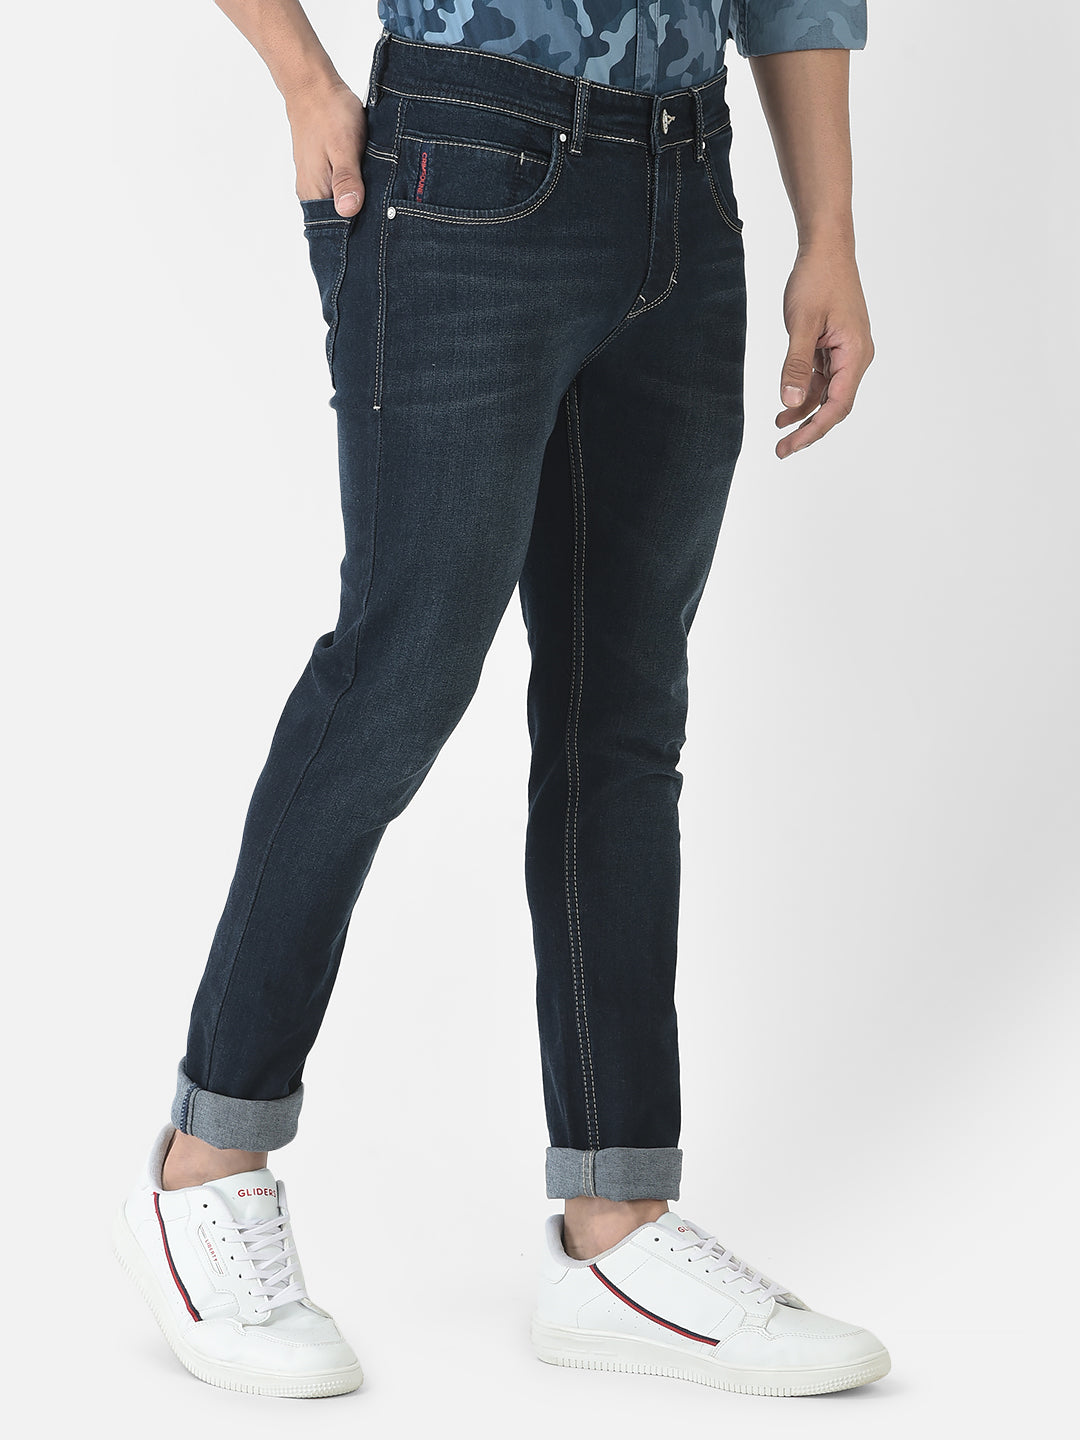  Dark Blue Jeans with Light Wash Effect 